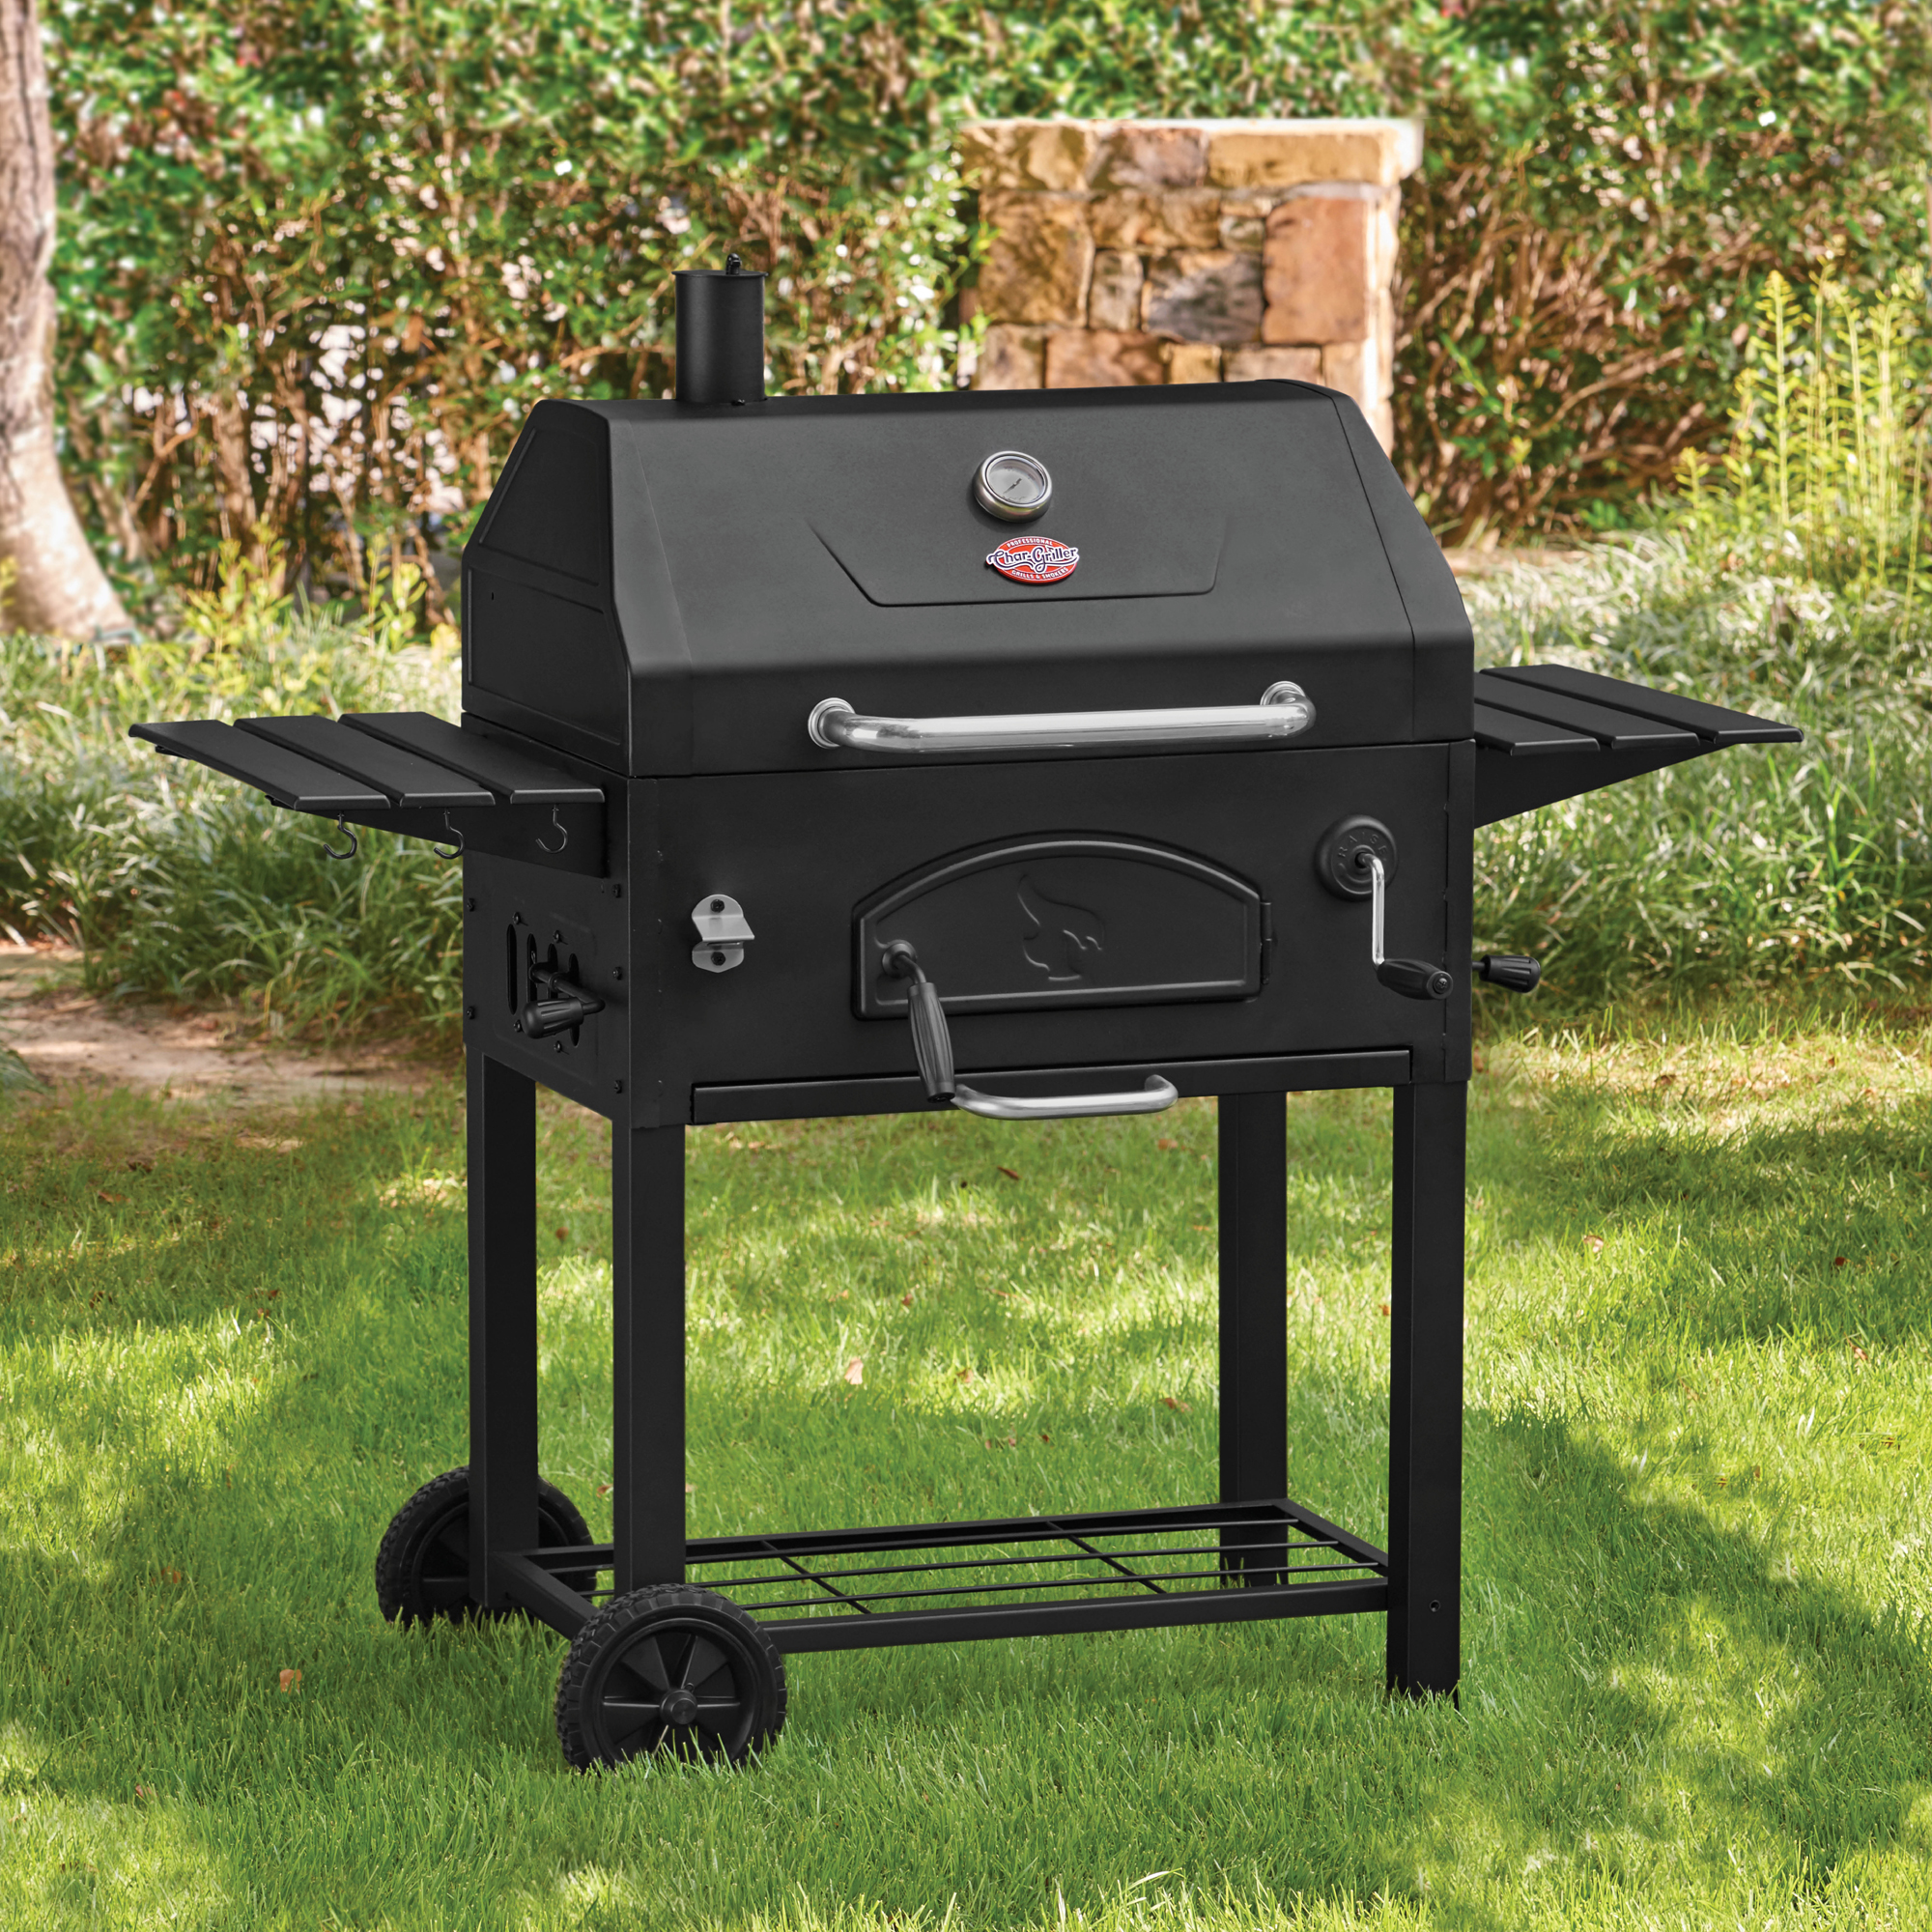 Char-Griller Traditional Charcoal Grill, Black - image 2 of 15